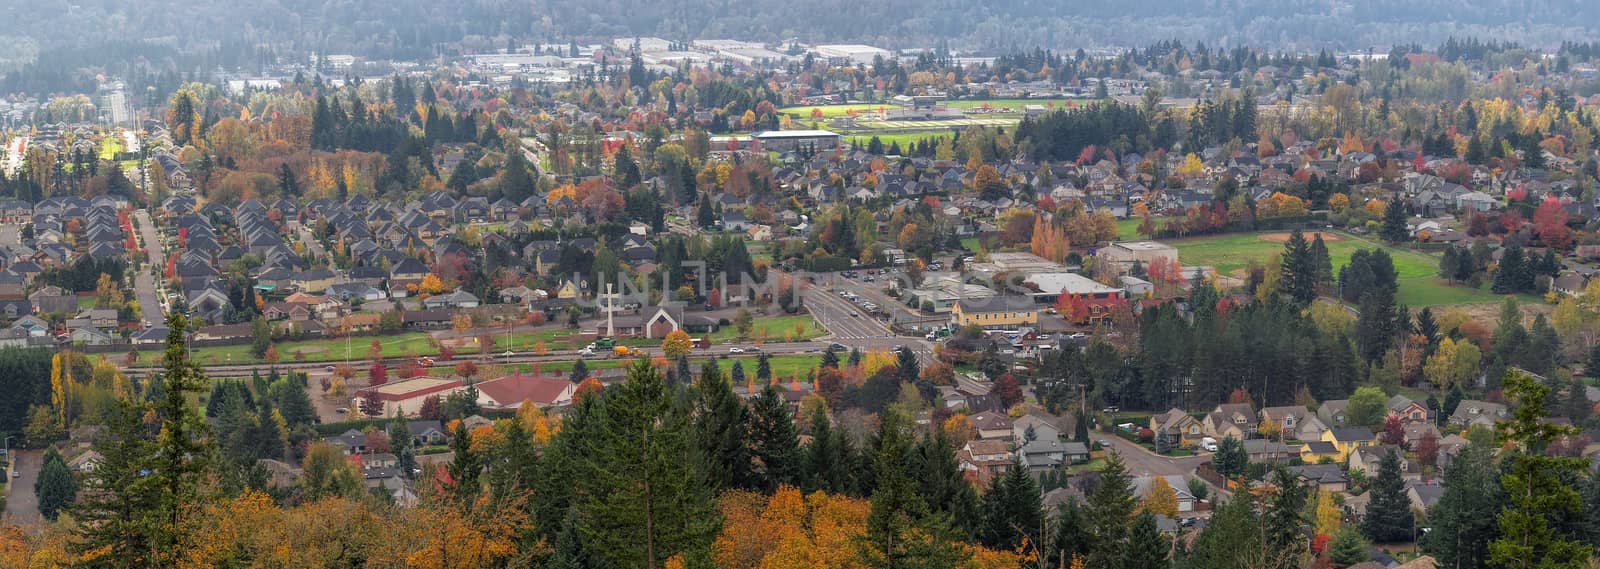 Happy Valley Oregon Rapid Growing City Residential Homes in Fall Season Panorama